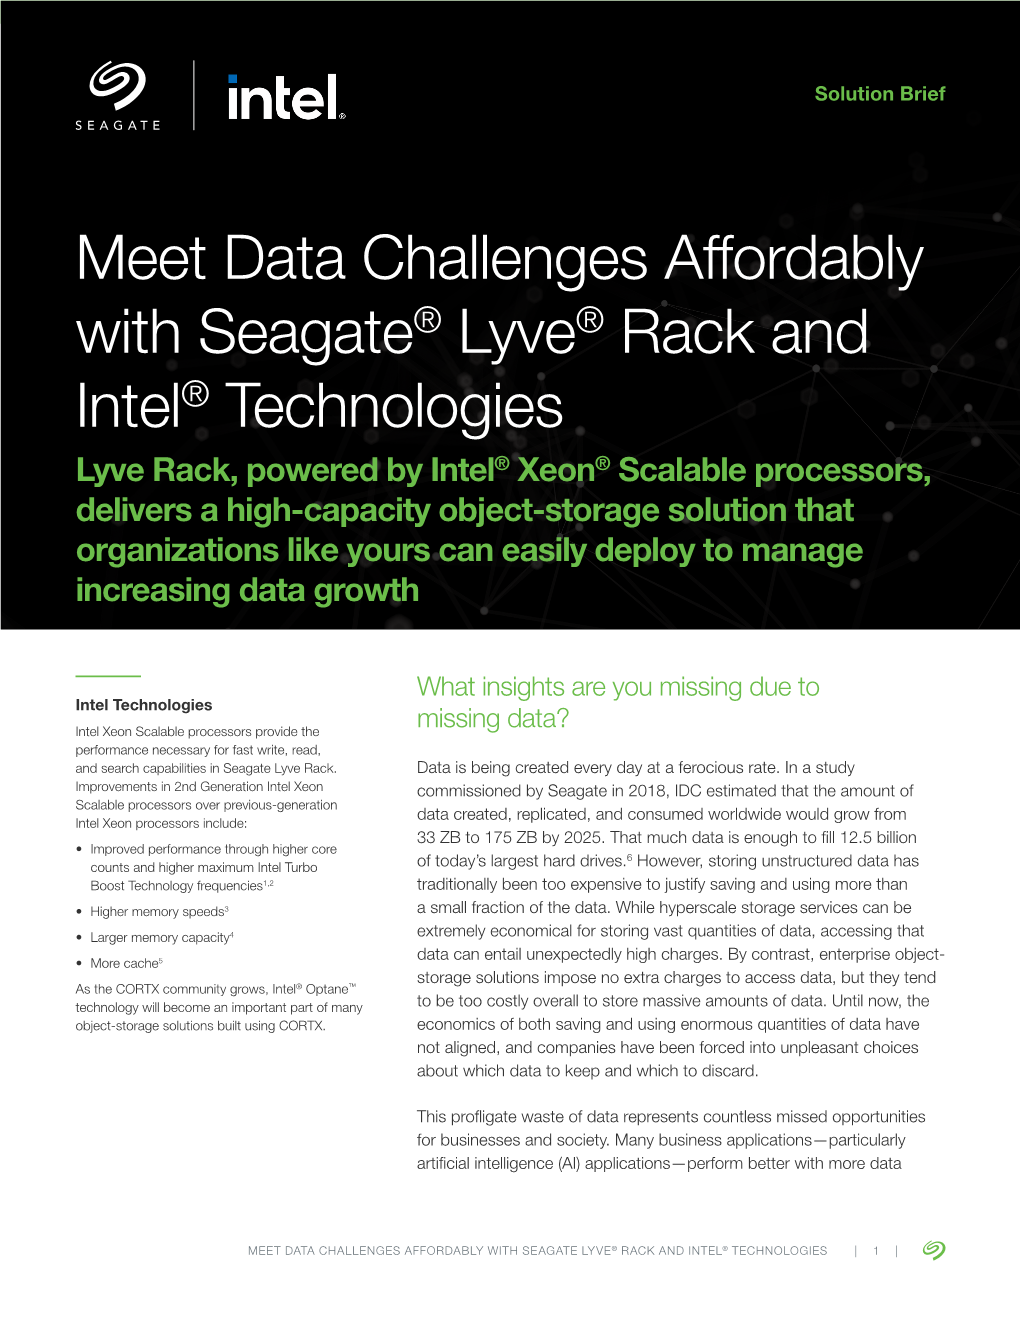 Meet Data Challenges Affordably with Seagate® Lyve® Rack and Intel